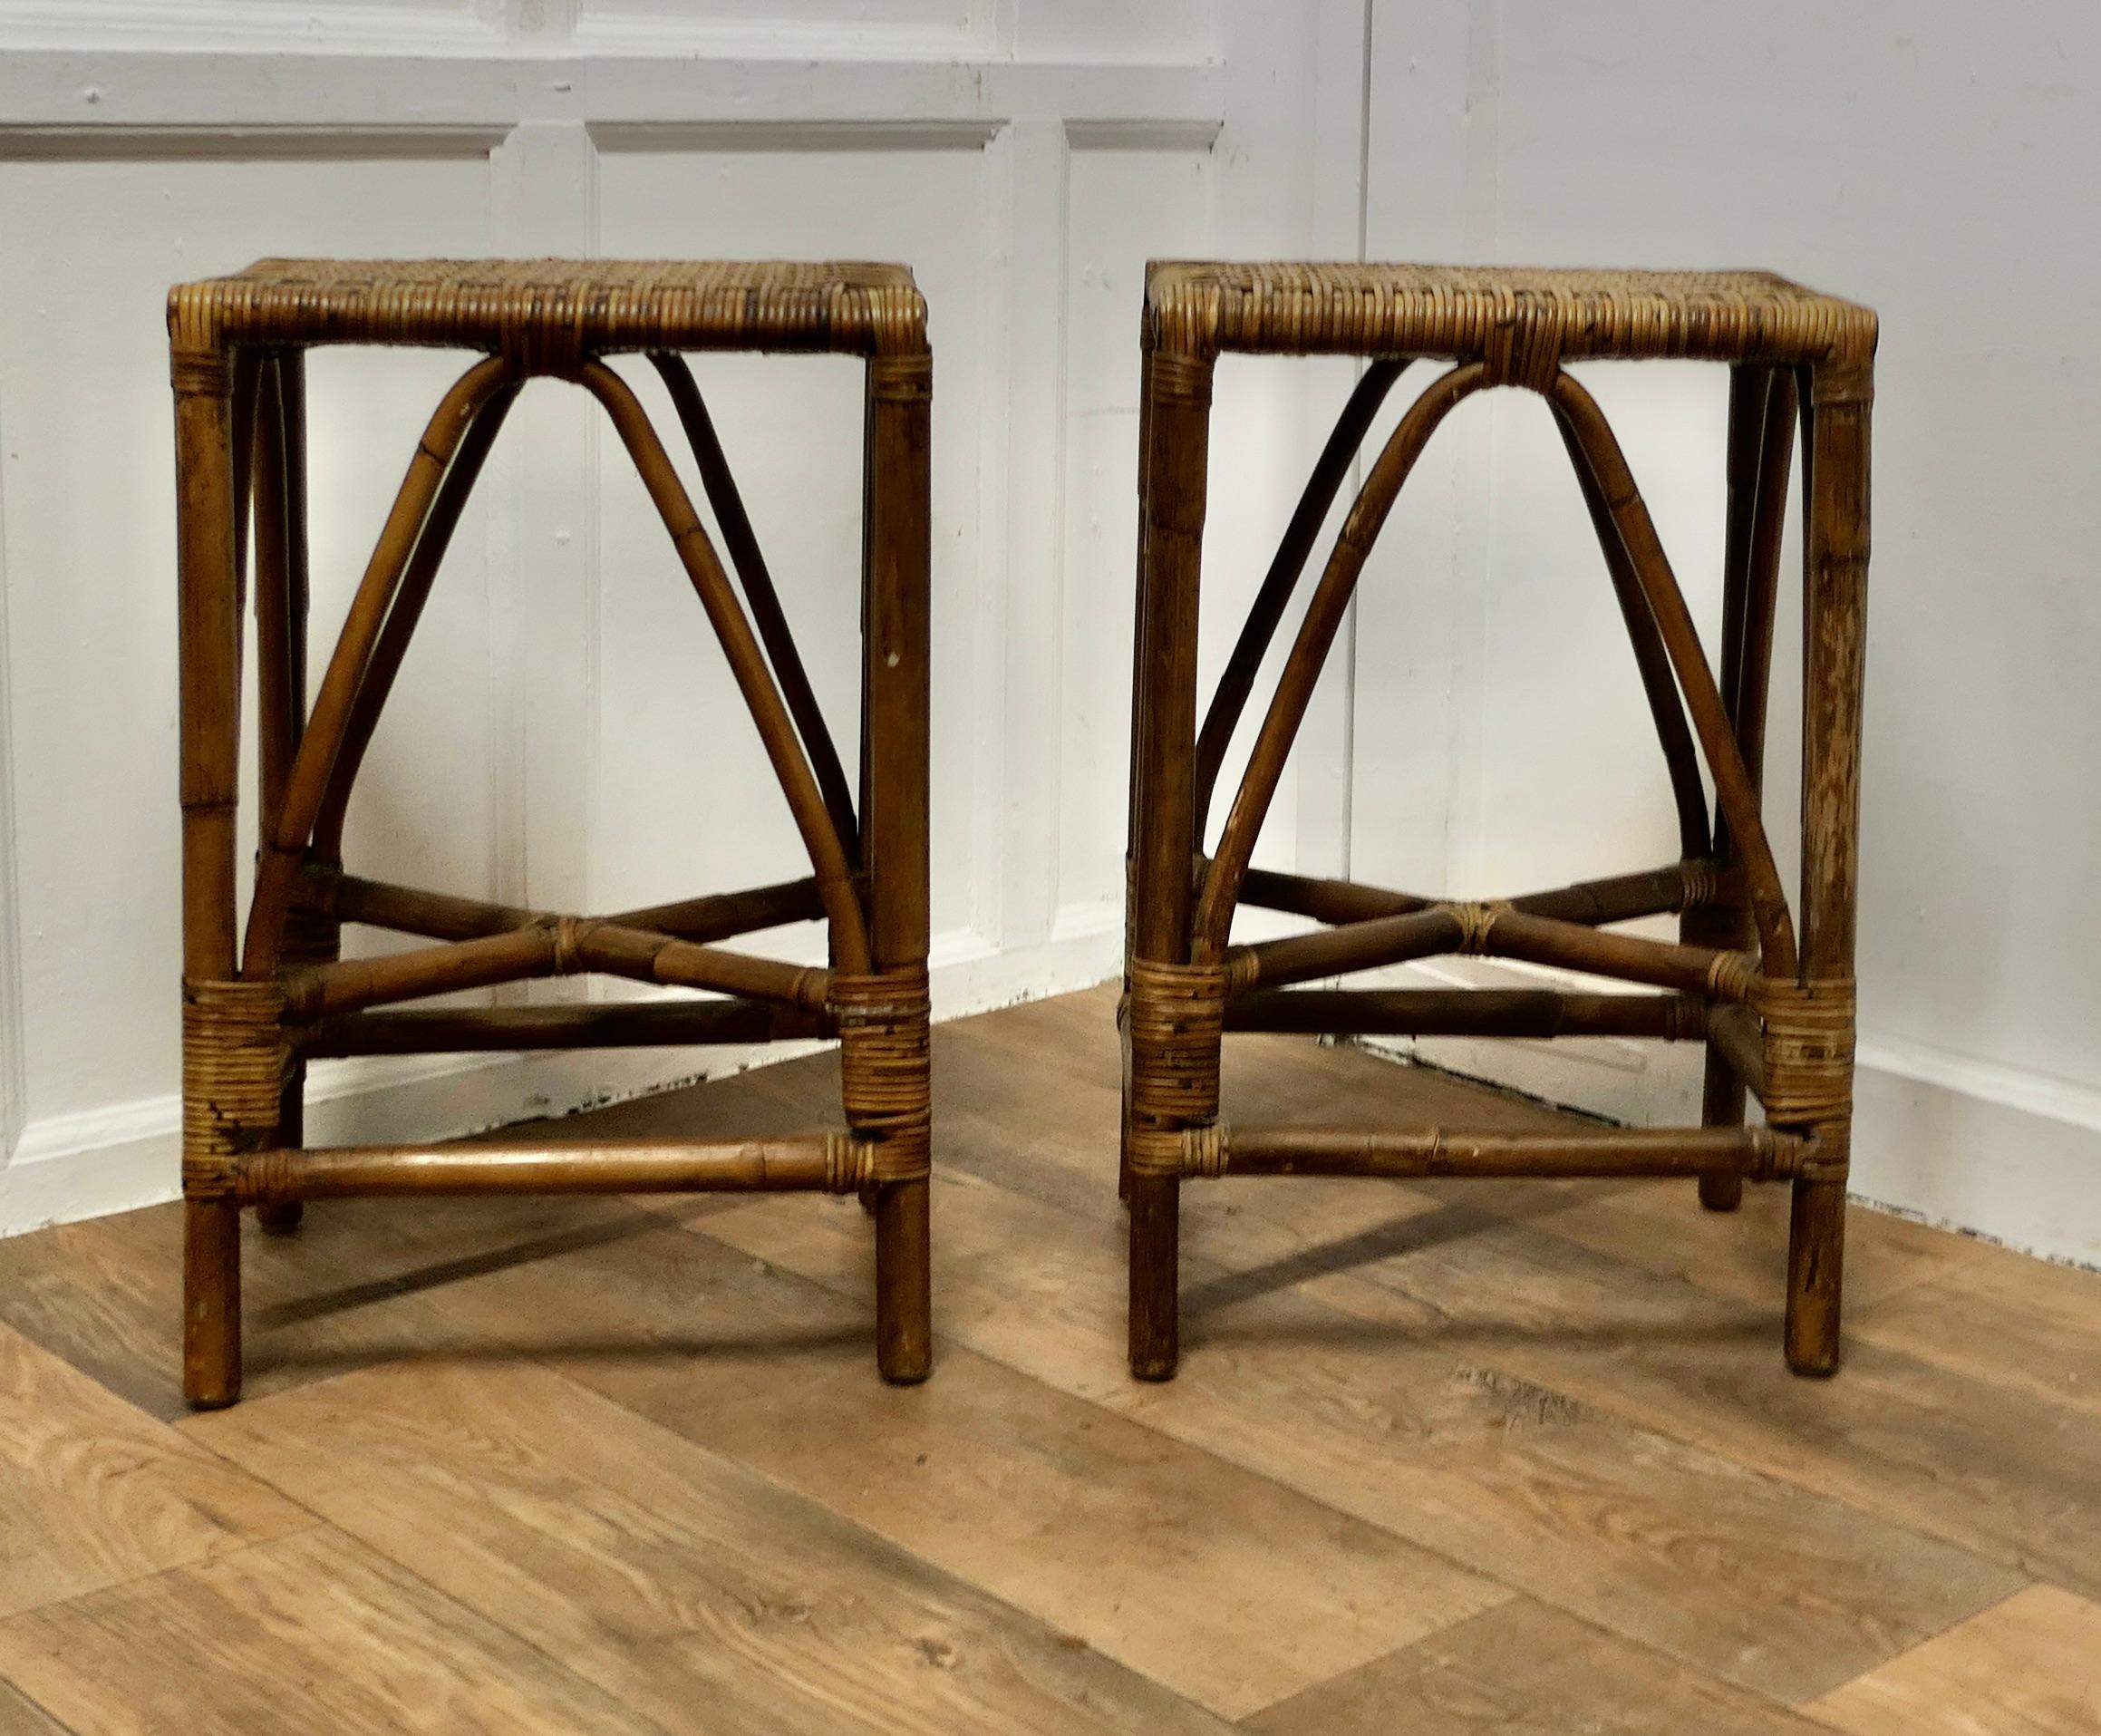 A Pair of Bamboo High Stools/Tables or Window Seats

A Very attractive pair with a beautiful mature colour, the seats are beautifully woven
These stools would make good window seats, bar stools or occasional tables and they are in good condition